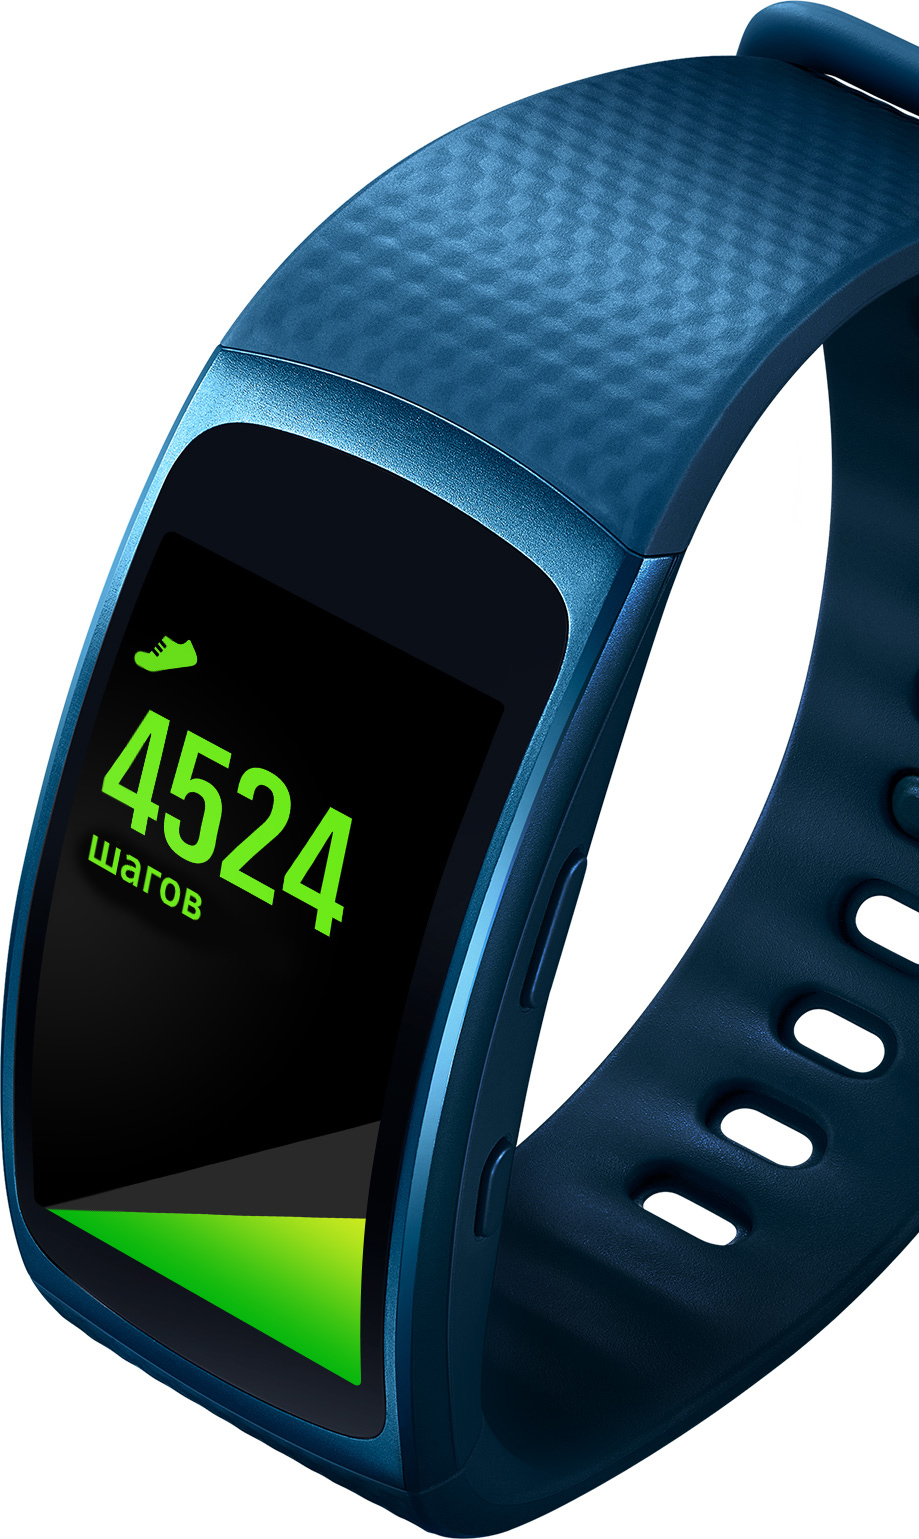 Fit 2 sport. Самсунг галакси фит 2. Самсунг Gear Fit 2. Фитнес браслет самсунг фит 2. Браслет для Samsung Fit 2.